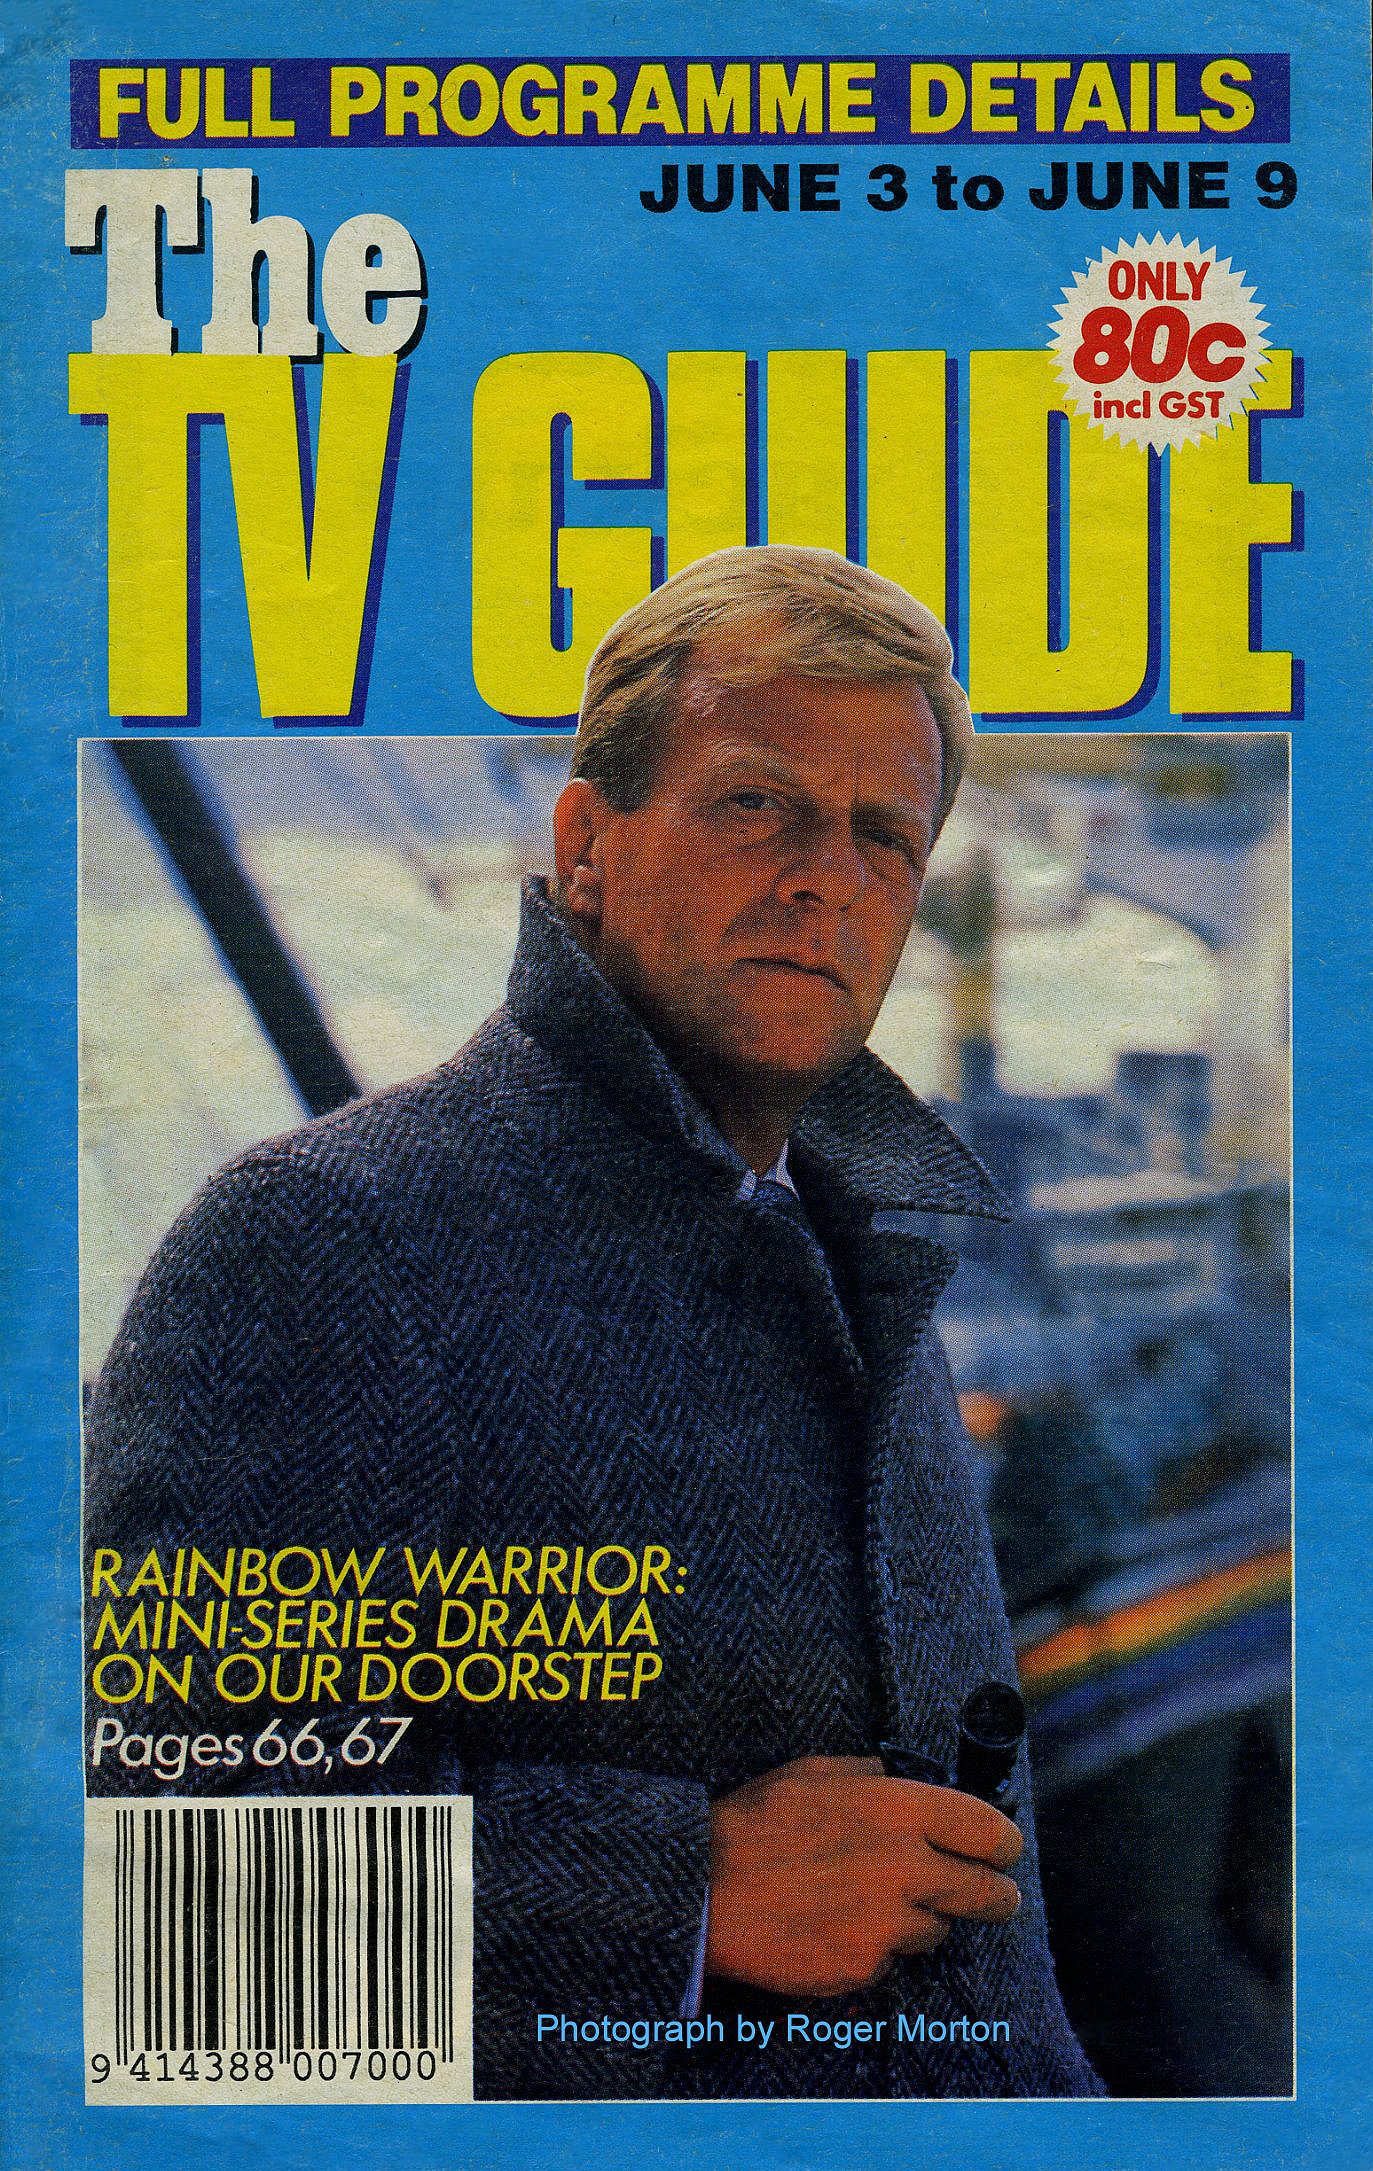 Jack Thompson was a leading actor in the TV Series, "The Rainbow Warrior Conspiracy"